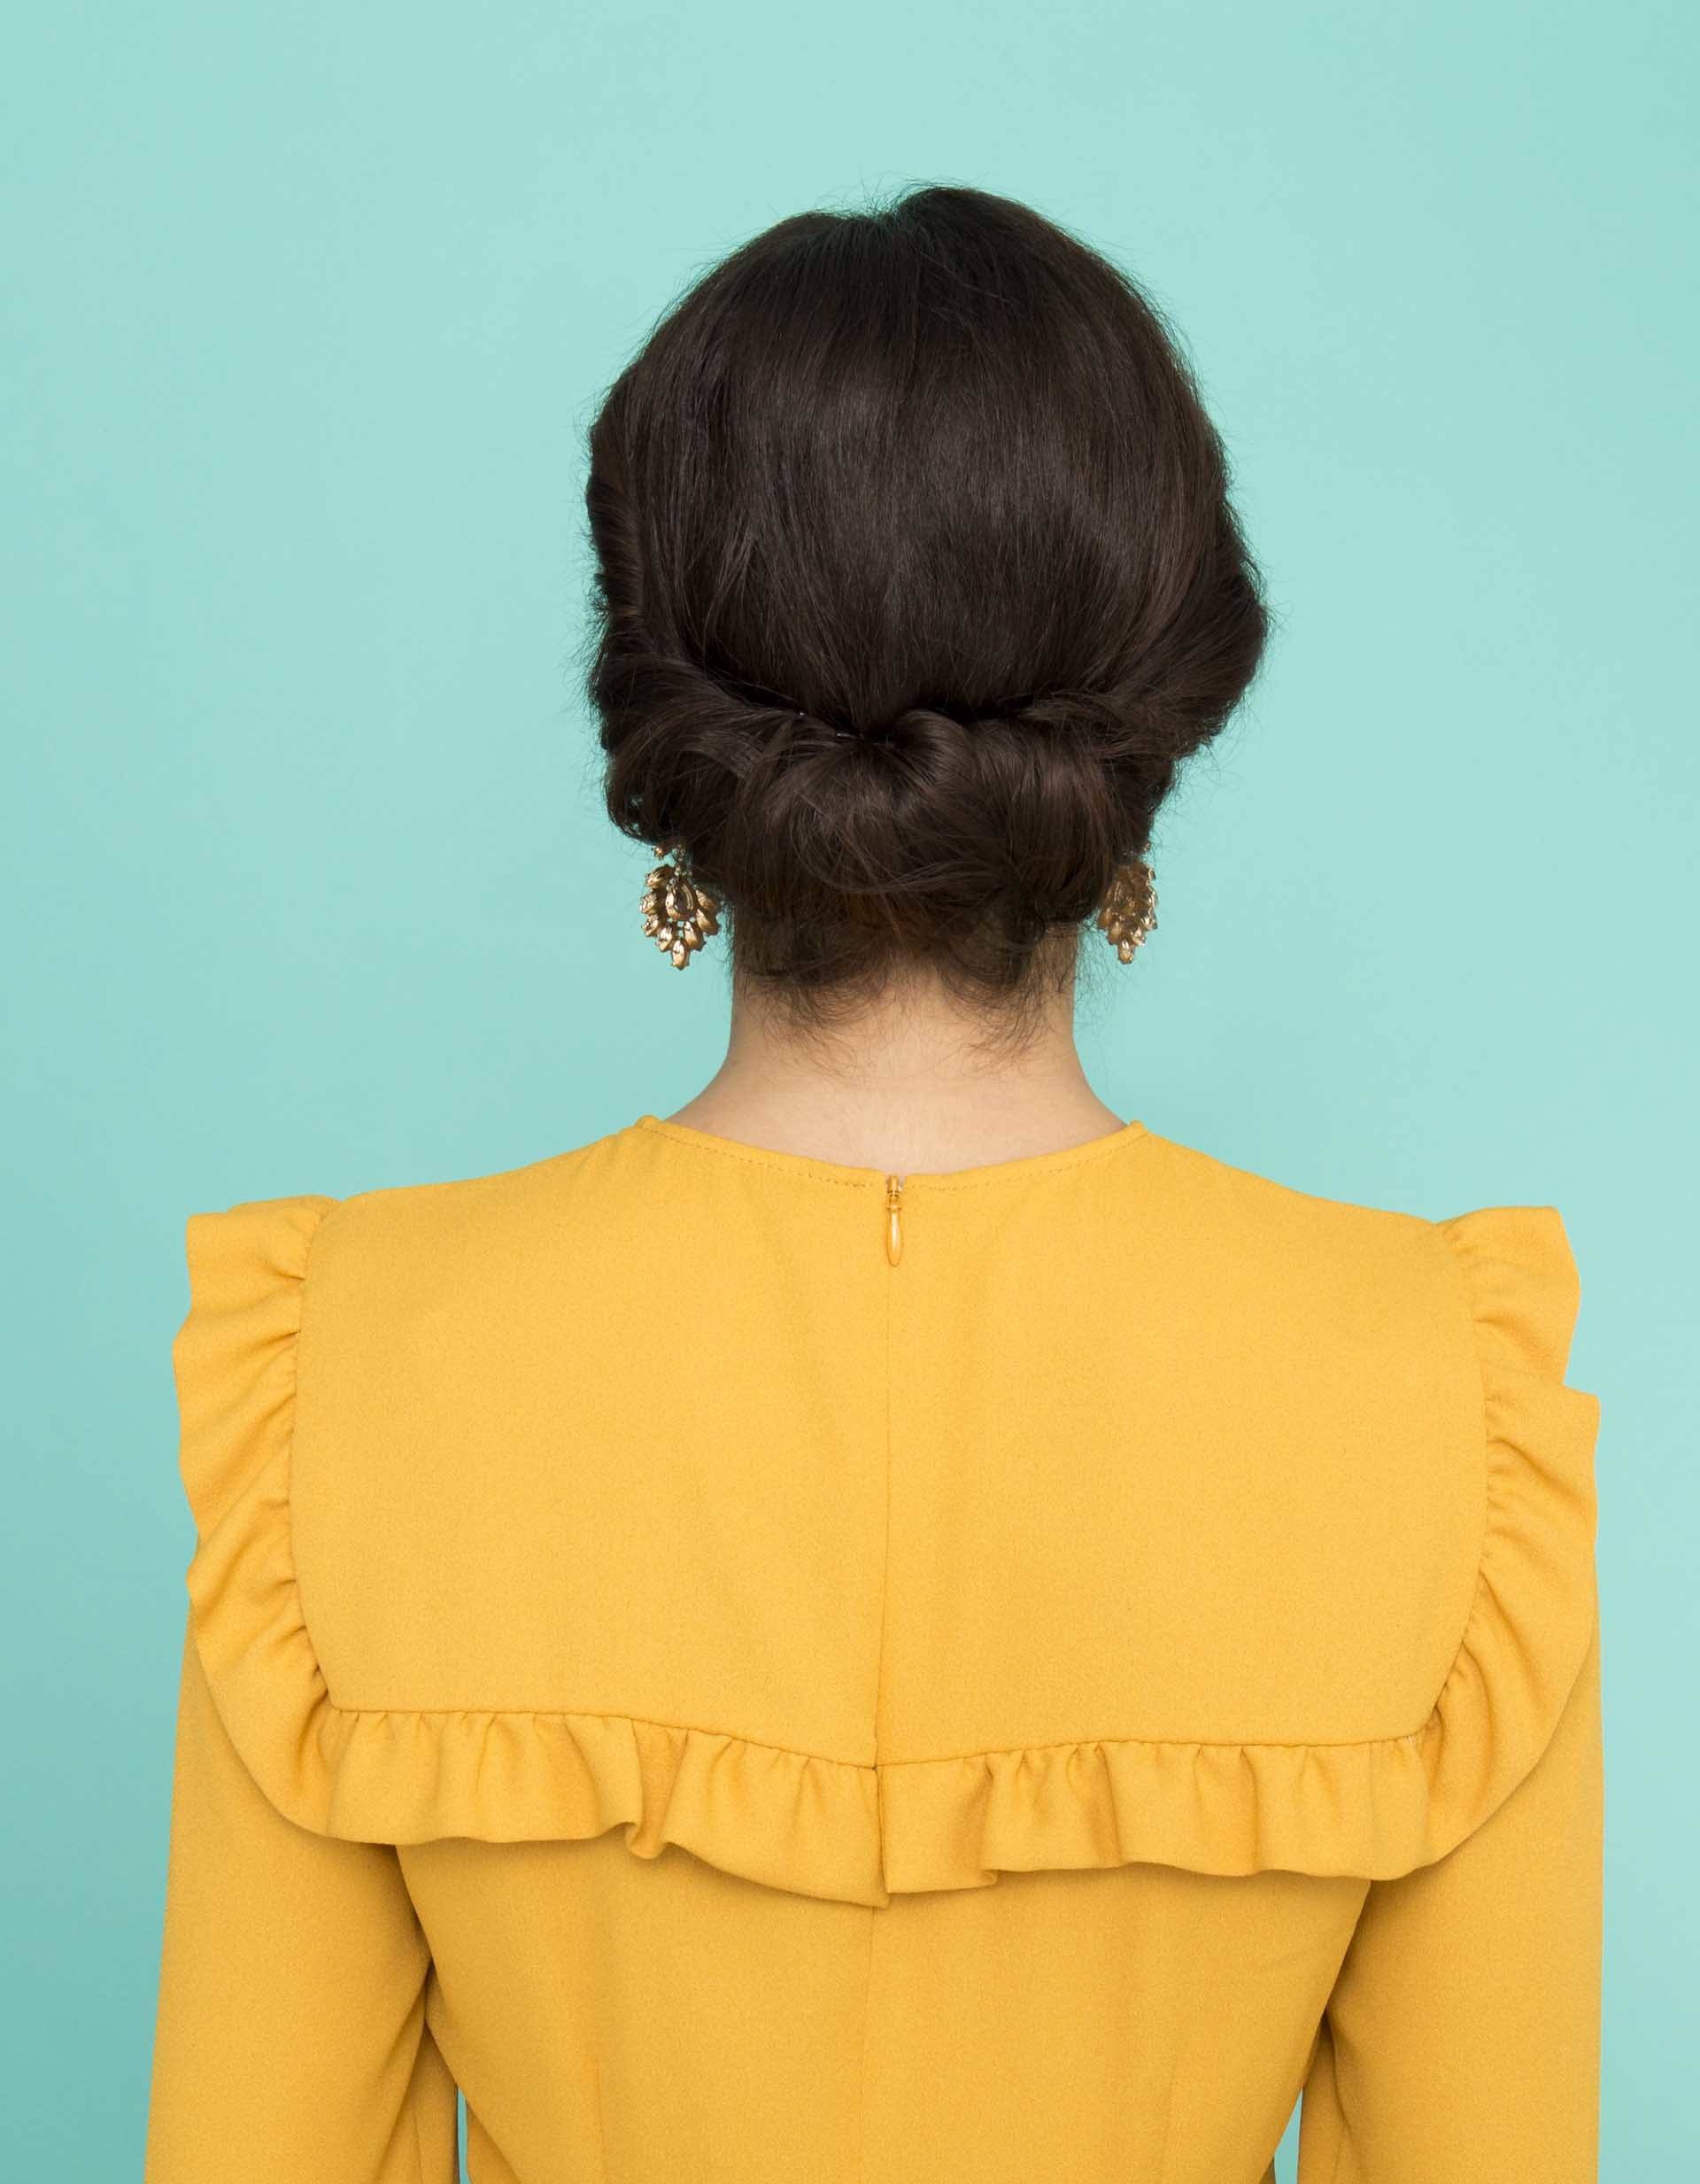 prom hairstyles for medium hair: dark brown haired model showing off gibson tuck hairstyle from behind while wearing bright yellow dress